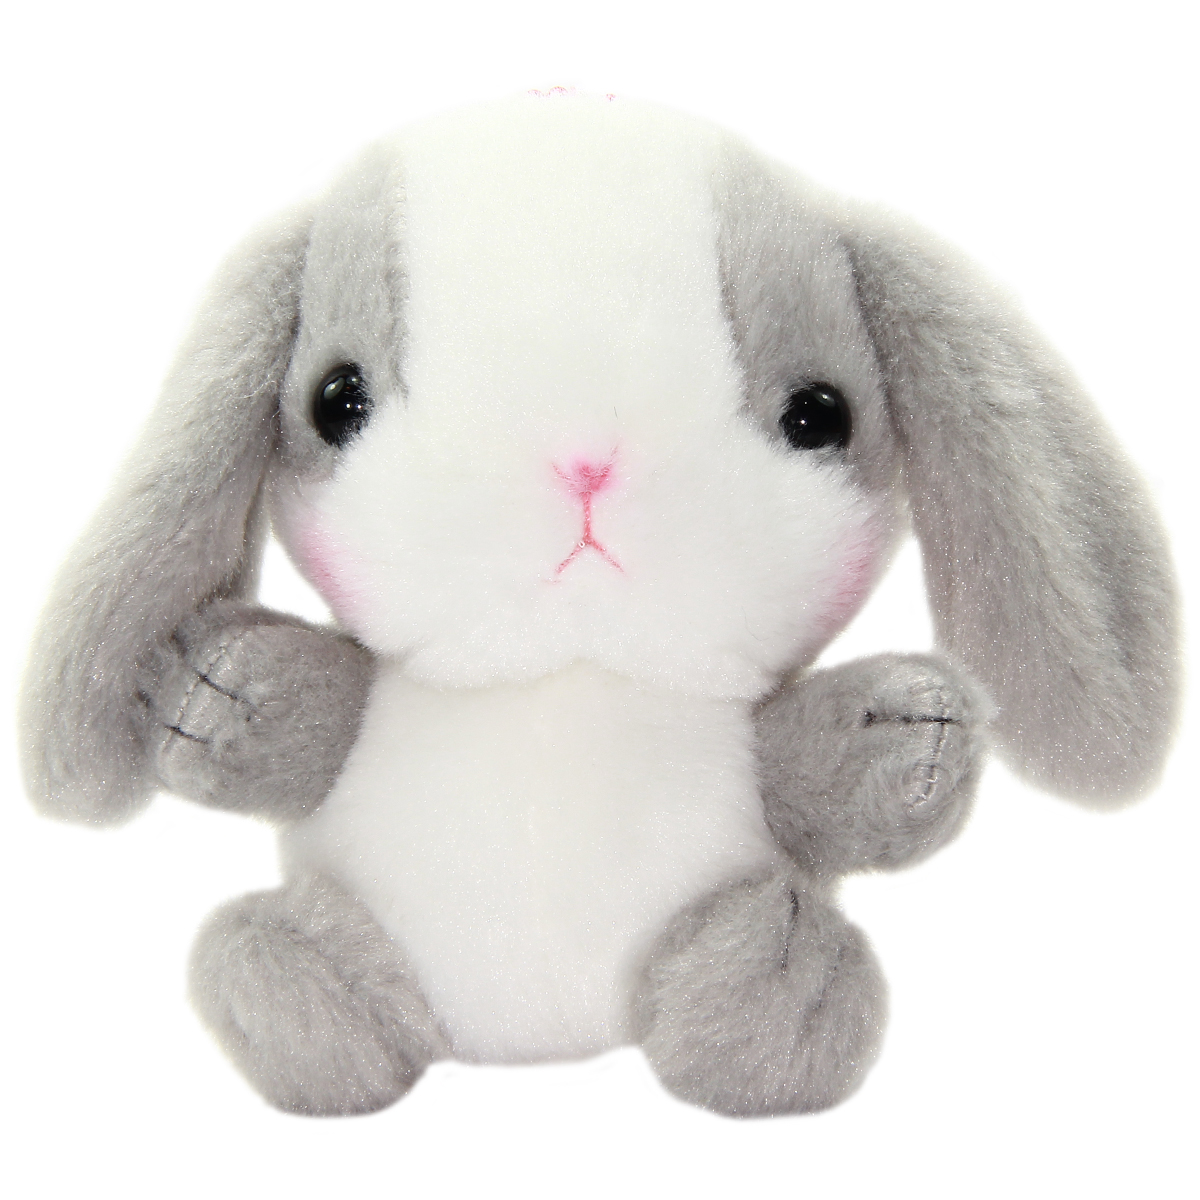 Amuse Gathering Bunny Plushie Collection Cute Stuffed Animal Toy White / Grey 4 Inches